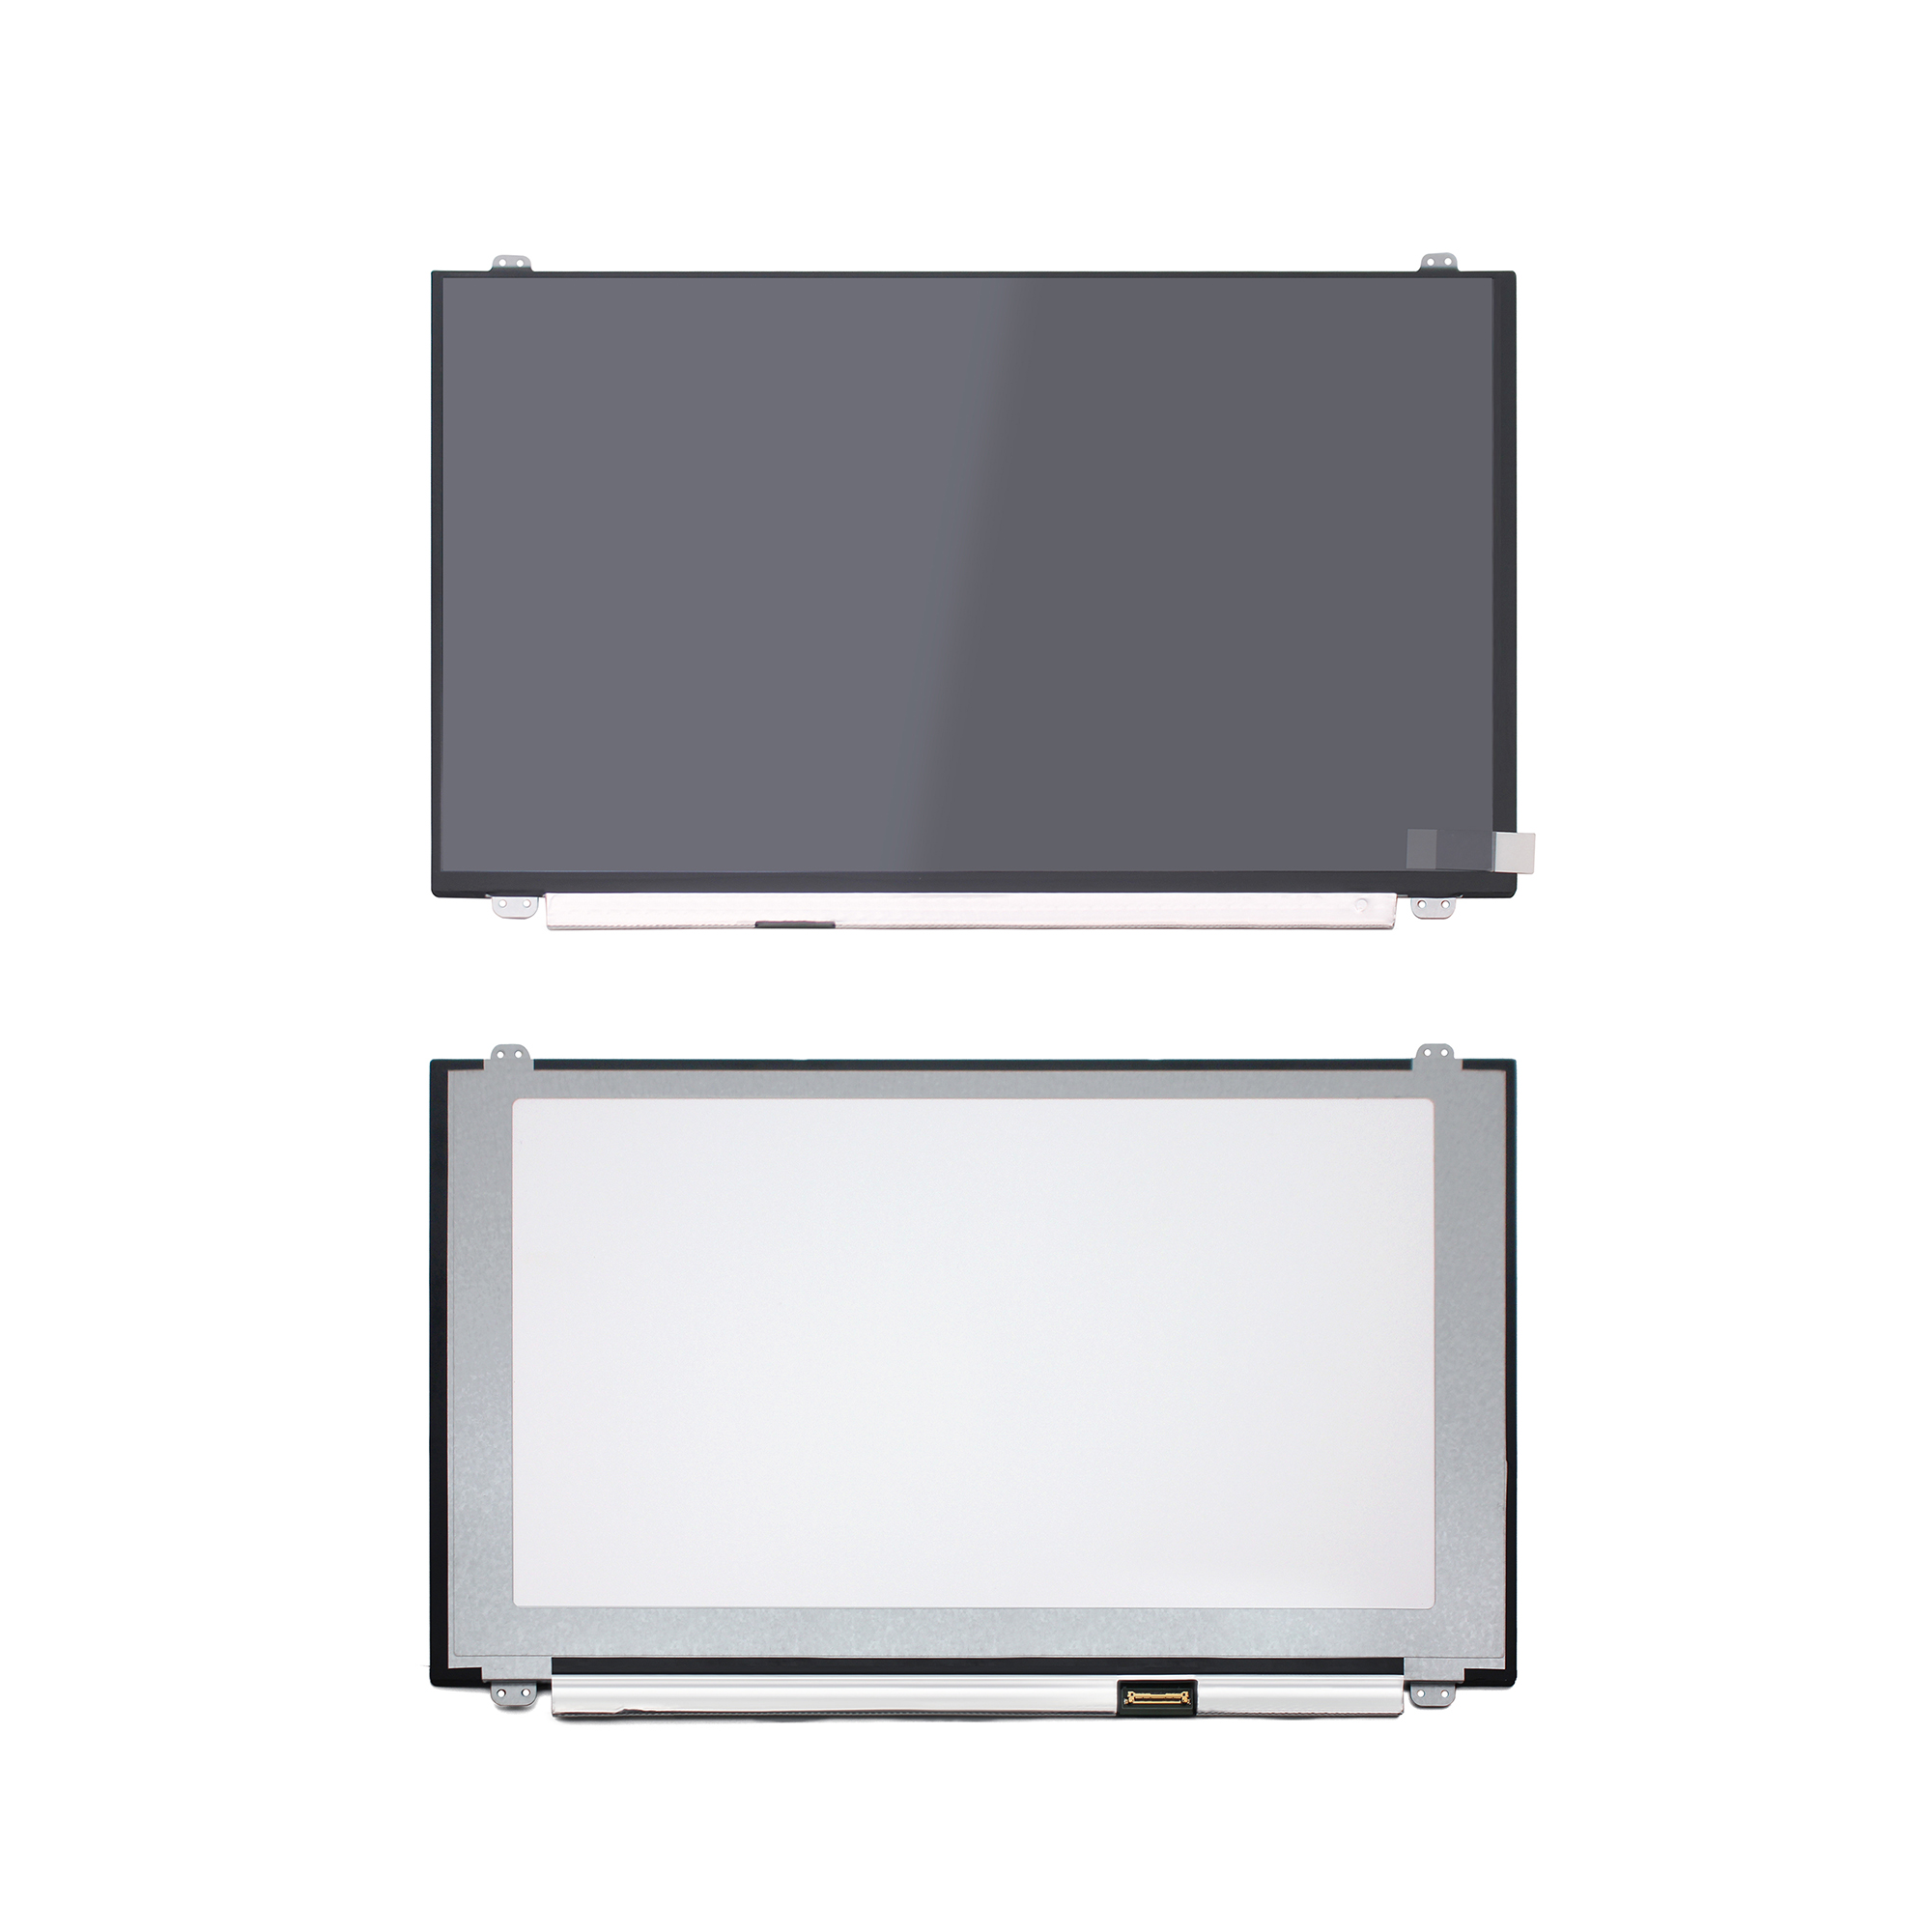 LCDOLED LCD Screen Display LED IPS Panel Matrix 120HZ N156HCE-GA2 N156HHE-GA1 For MSI GE60 GE63 GT62 GS63VR 7RG-078US Laptop LCDOLED LCD Screen Display LED IPS Panel Matrix 120HZ N156HCE-GA2 N156HHE-GA1 For MSI GE60 GE63 GT62 GS63VR 7RG-078US Laptop